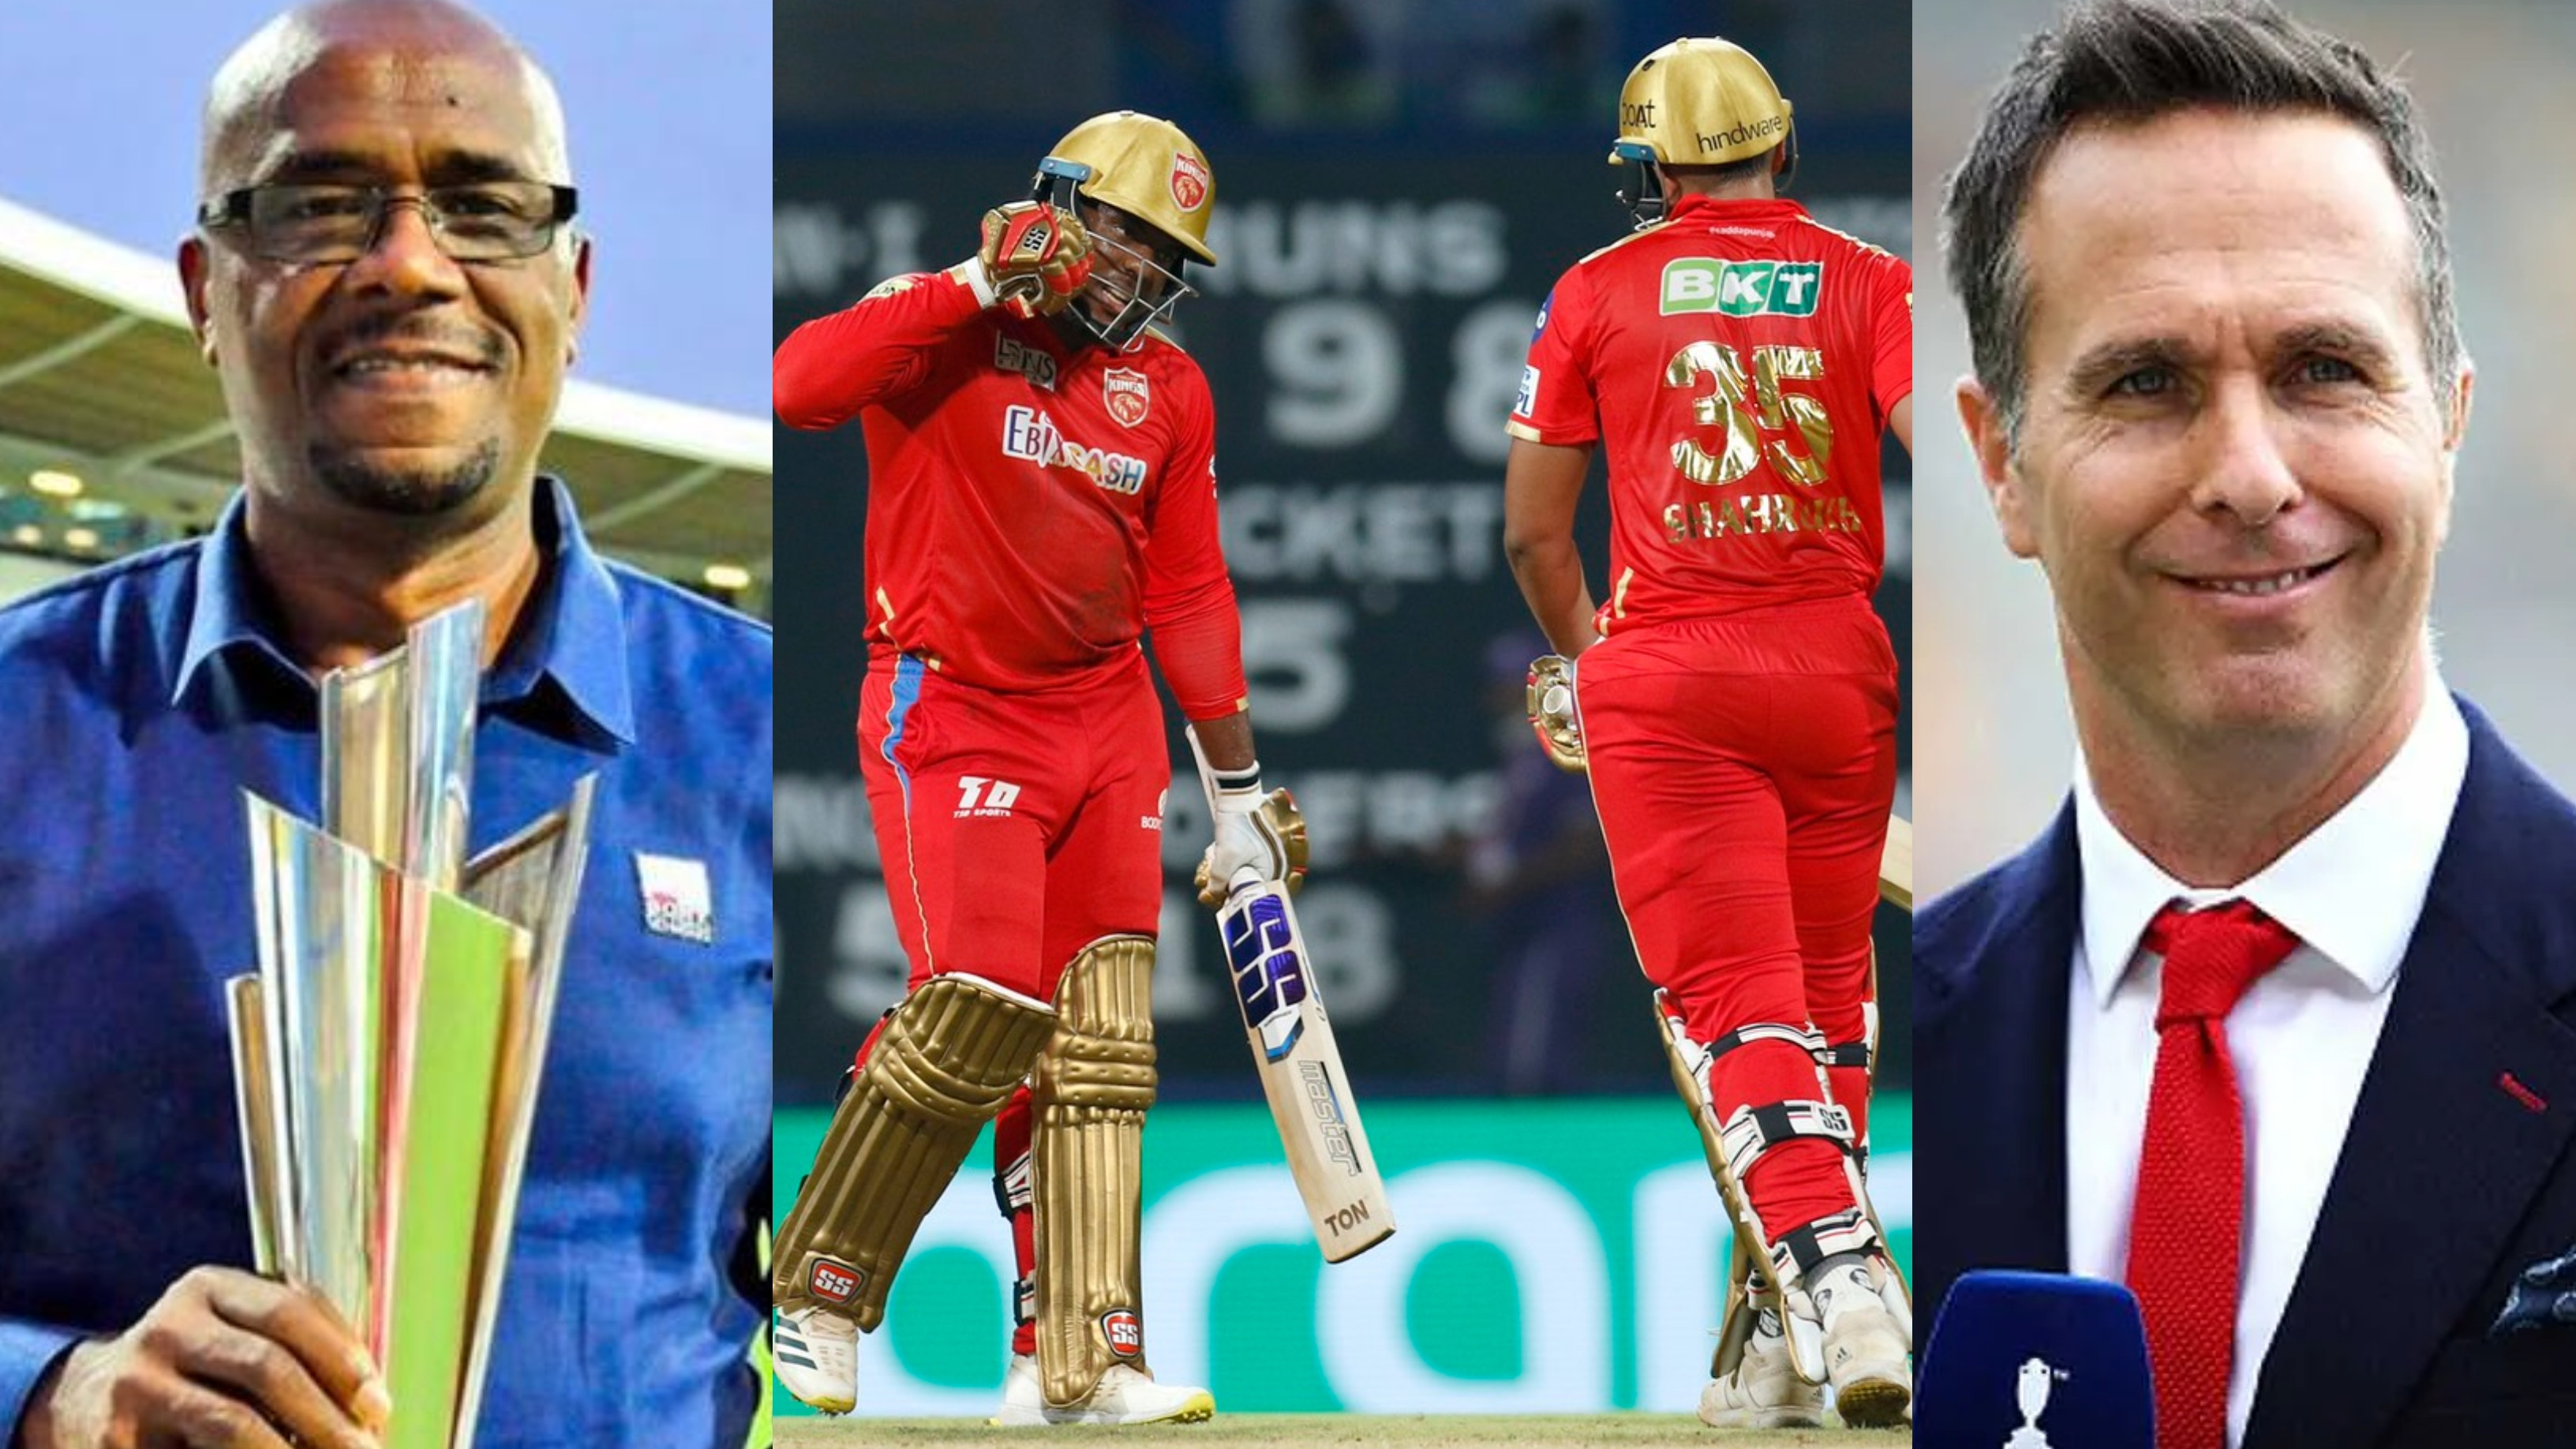 IPL 2022: Cricket fraternity reacts as Odean Smith, Shahrukh Khan’s cameos help PBKS pull off big chase over RCB